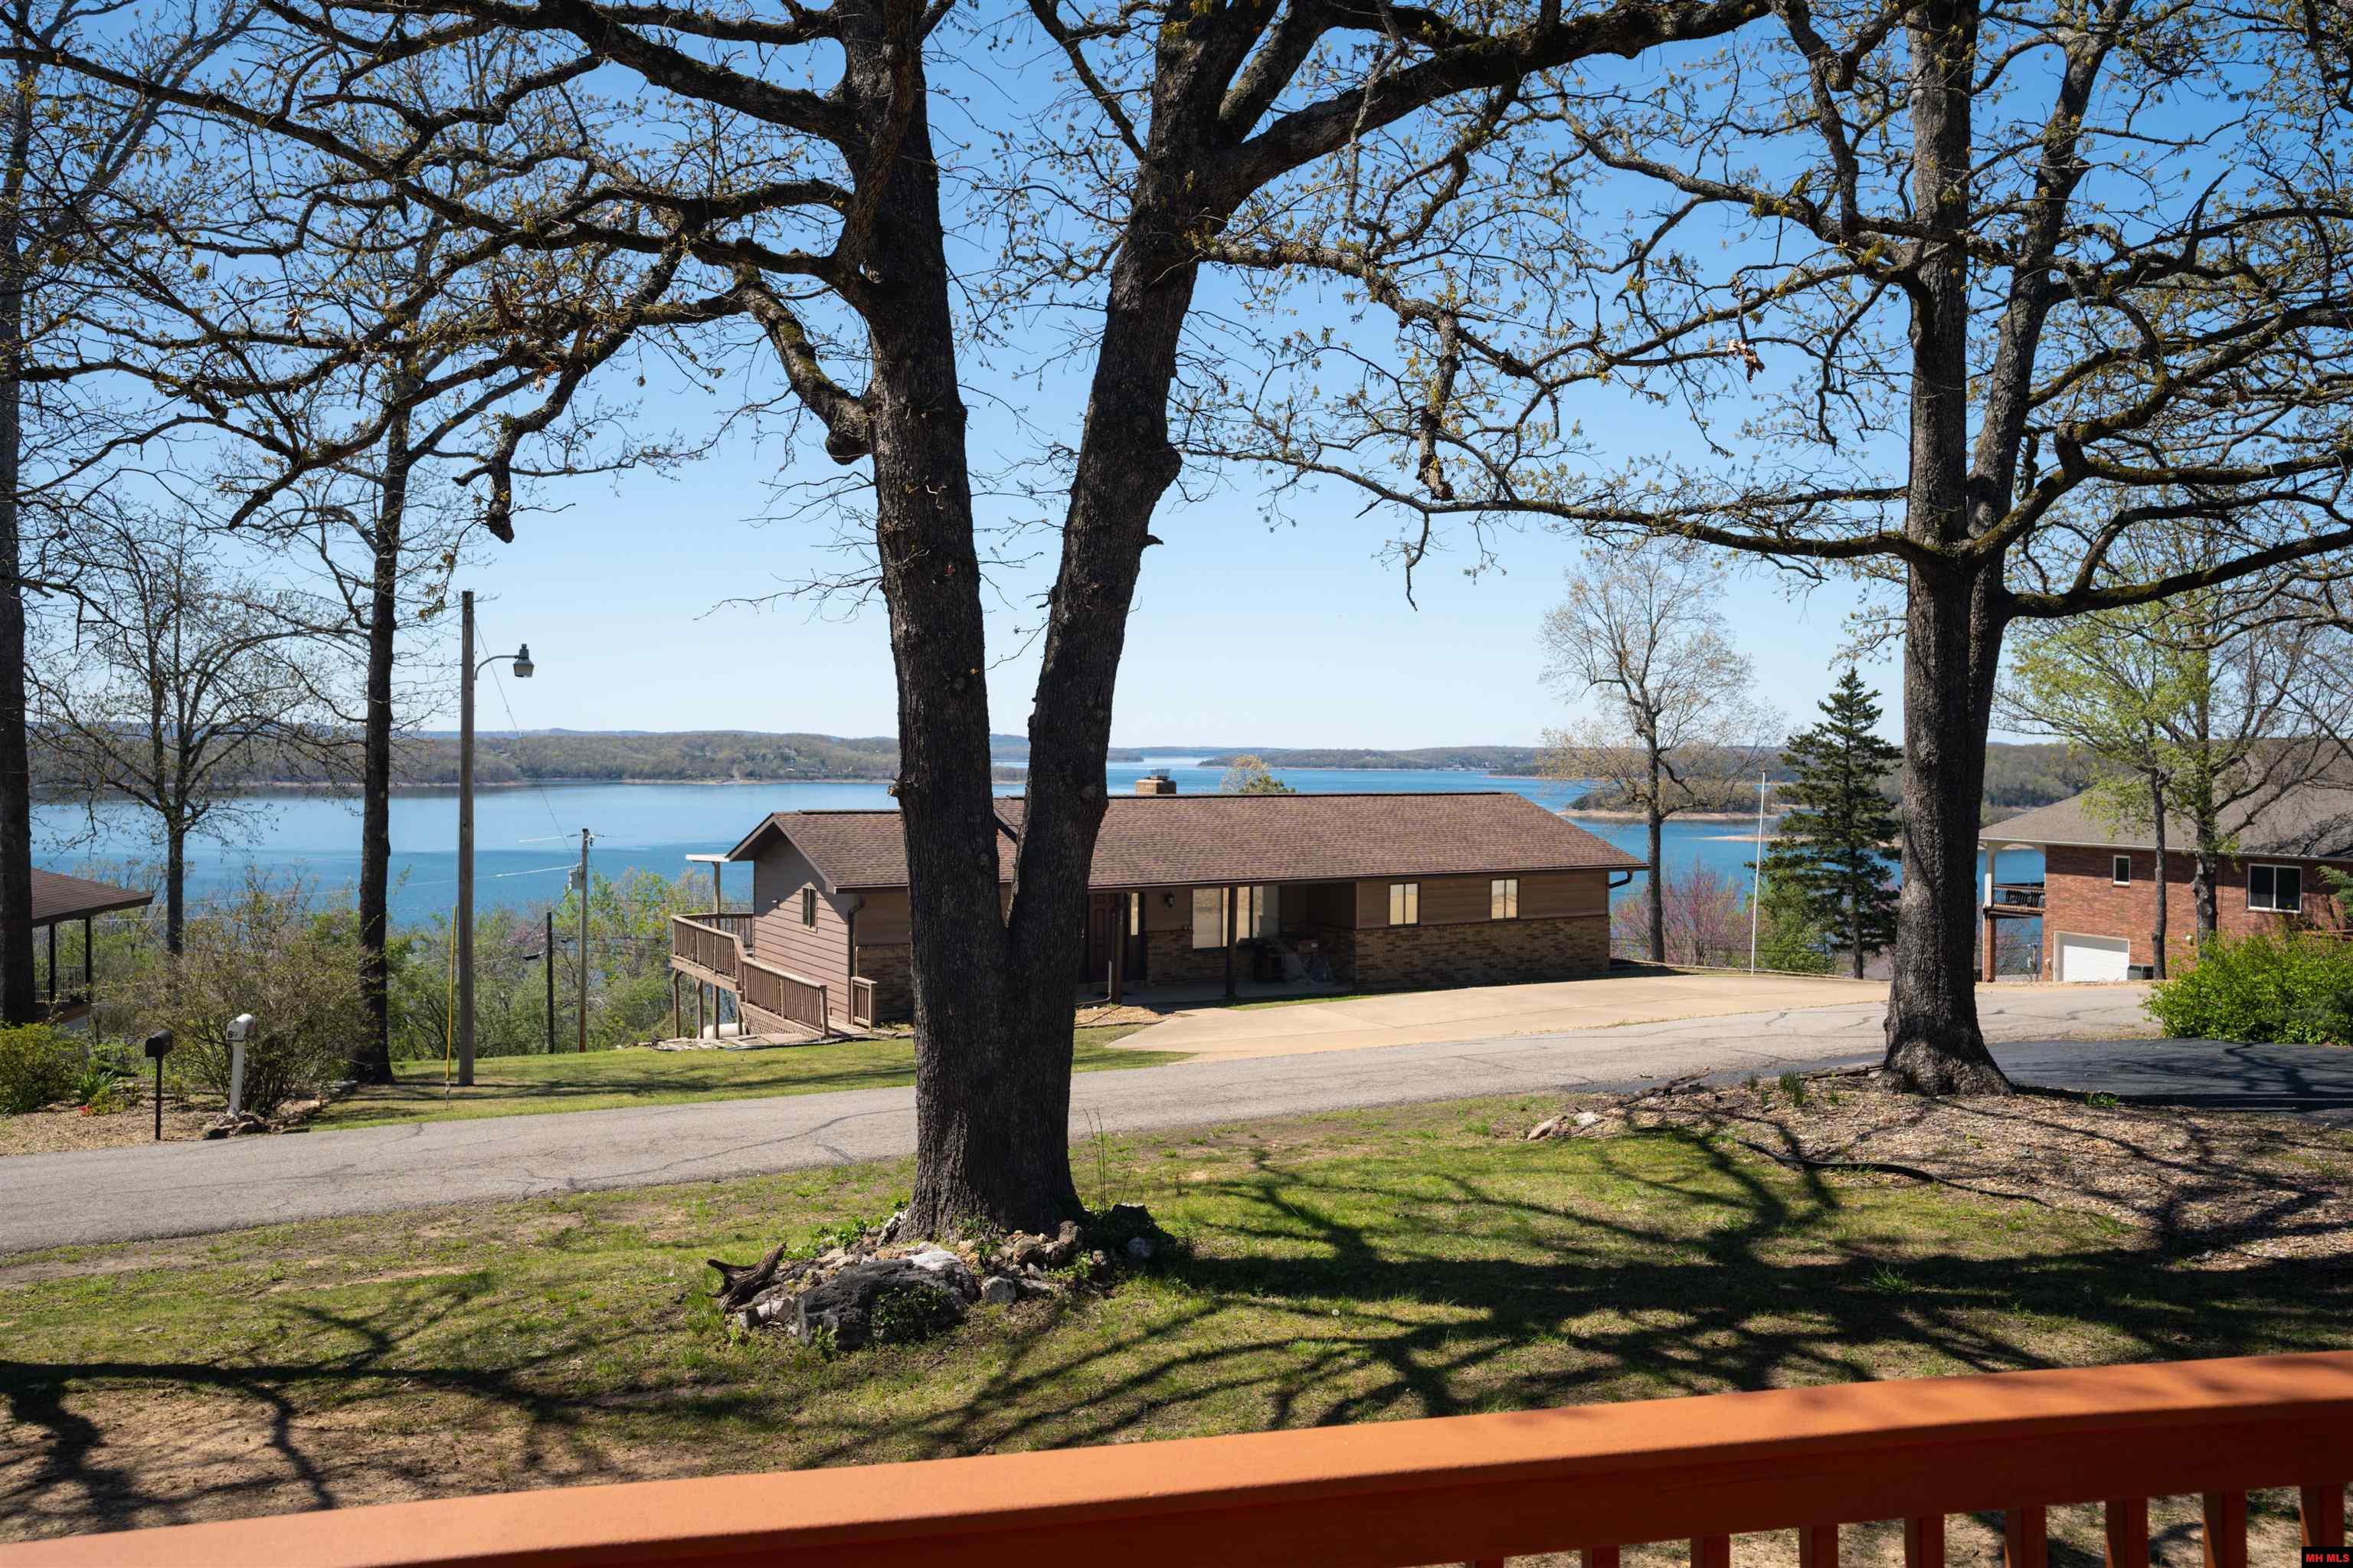 693 EDGEWOOD BAY DRIVE | Lakeview, AR